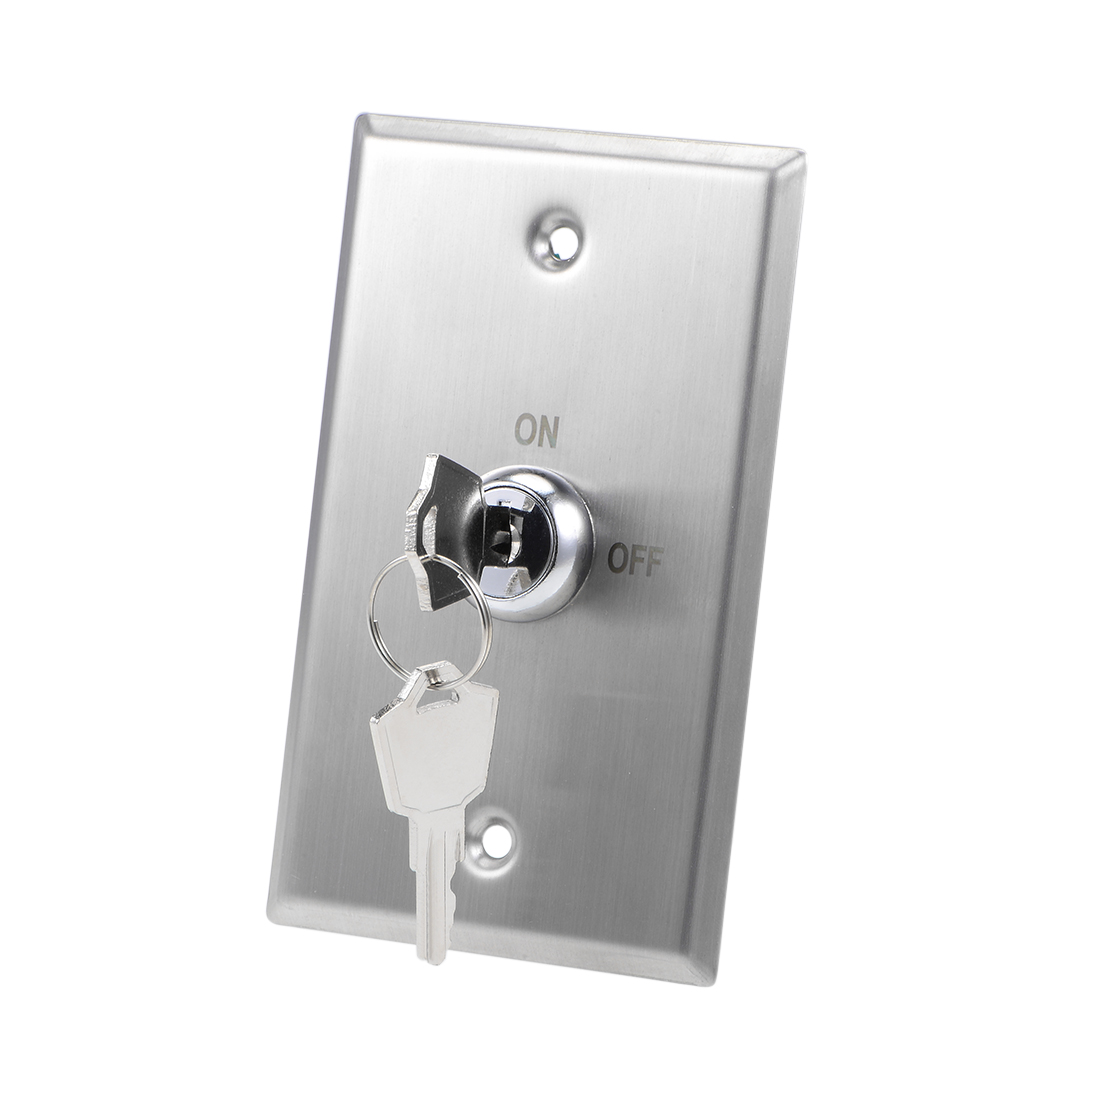 Unique Bargains Key Switch Lock On/Off Exit Switch Door Release DPST for Access Control w 2 Keys